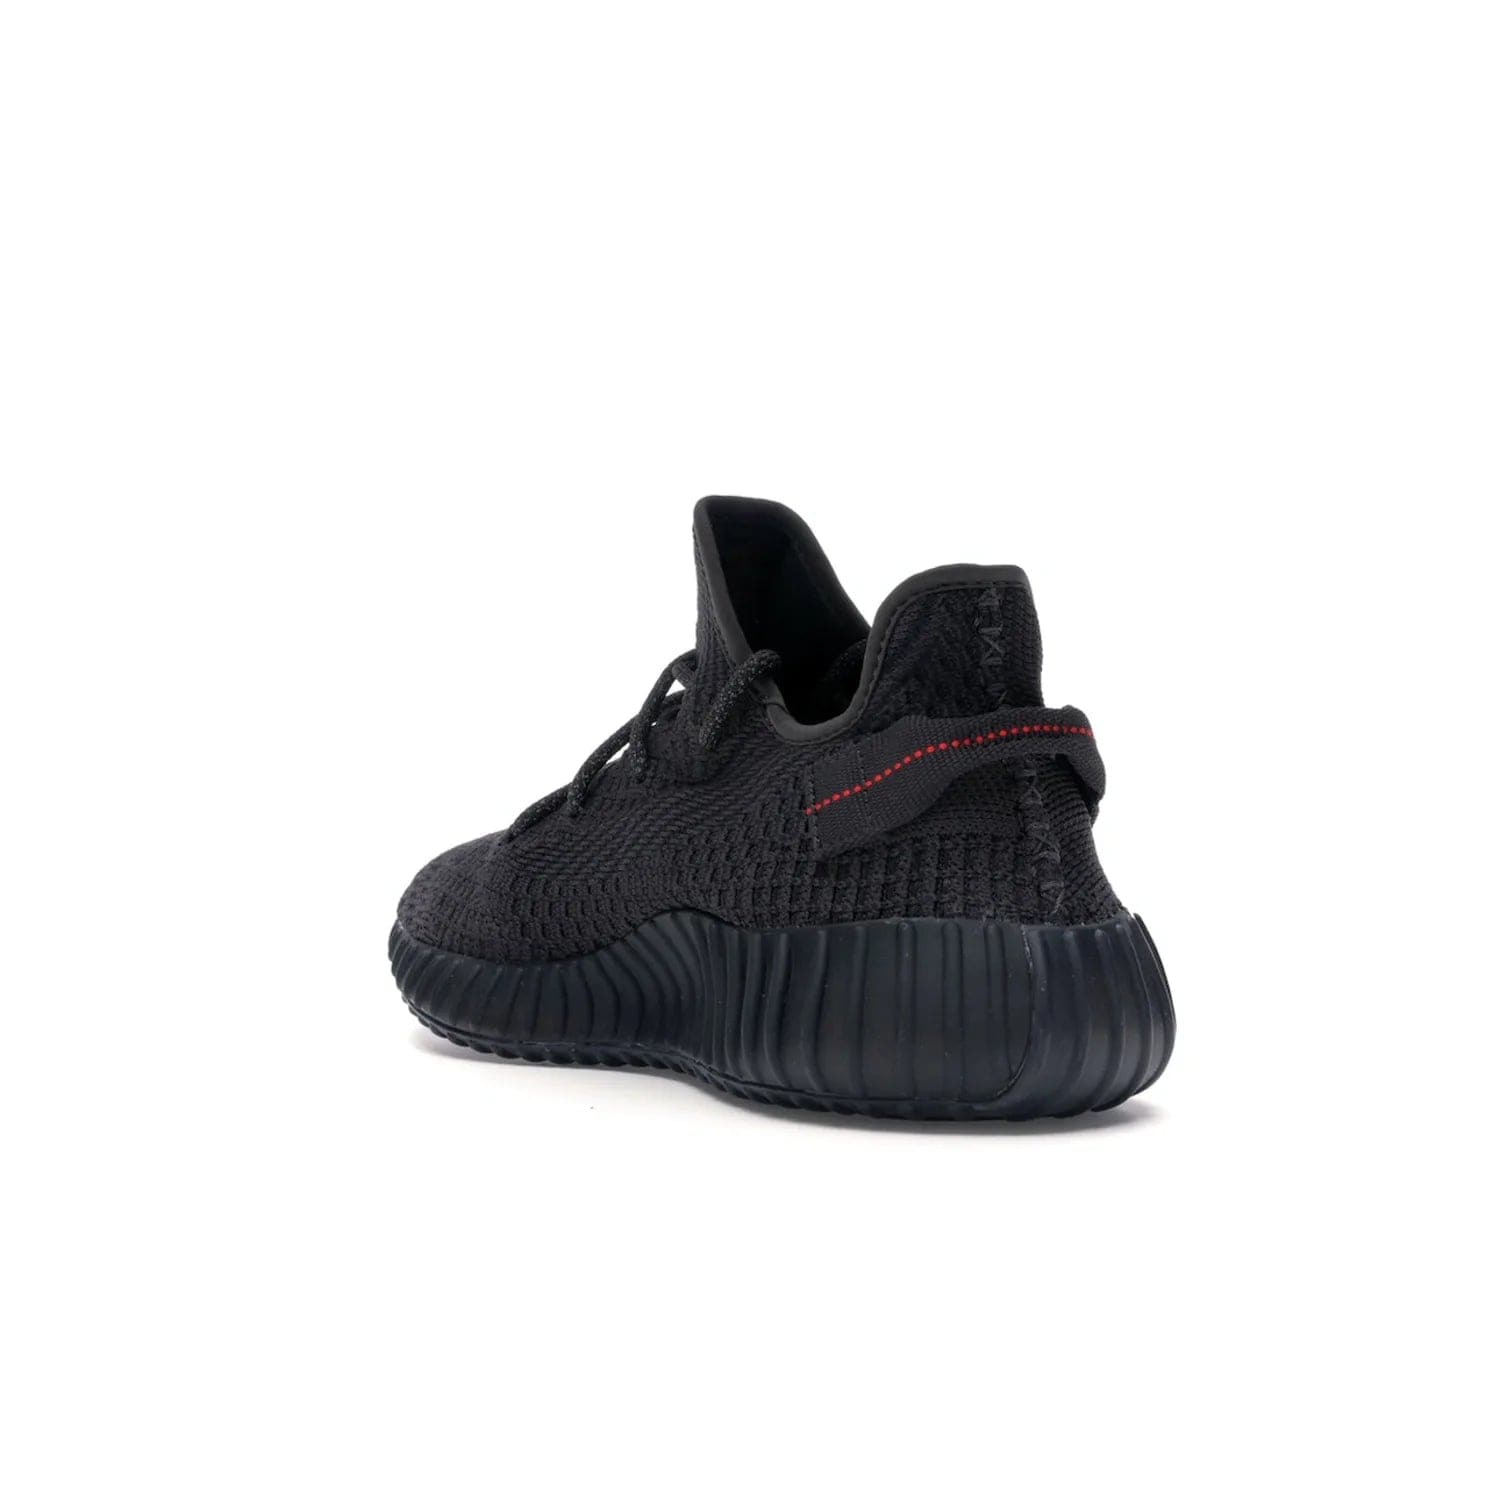 adidas Yeezy Boost 350 V2 Black (Non-Reflective) - Image 25 - Only at www.BallersClubKickz.com - A timeless, sleek silhouette crafted from quality materials. The adidas Yeezy Boost 350 V2 Black (Non-Reflective) brings style and sophistication. Get yours now!